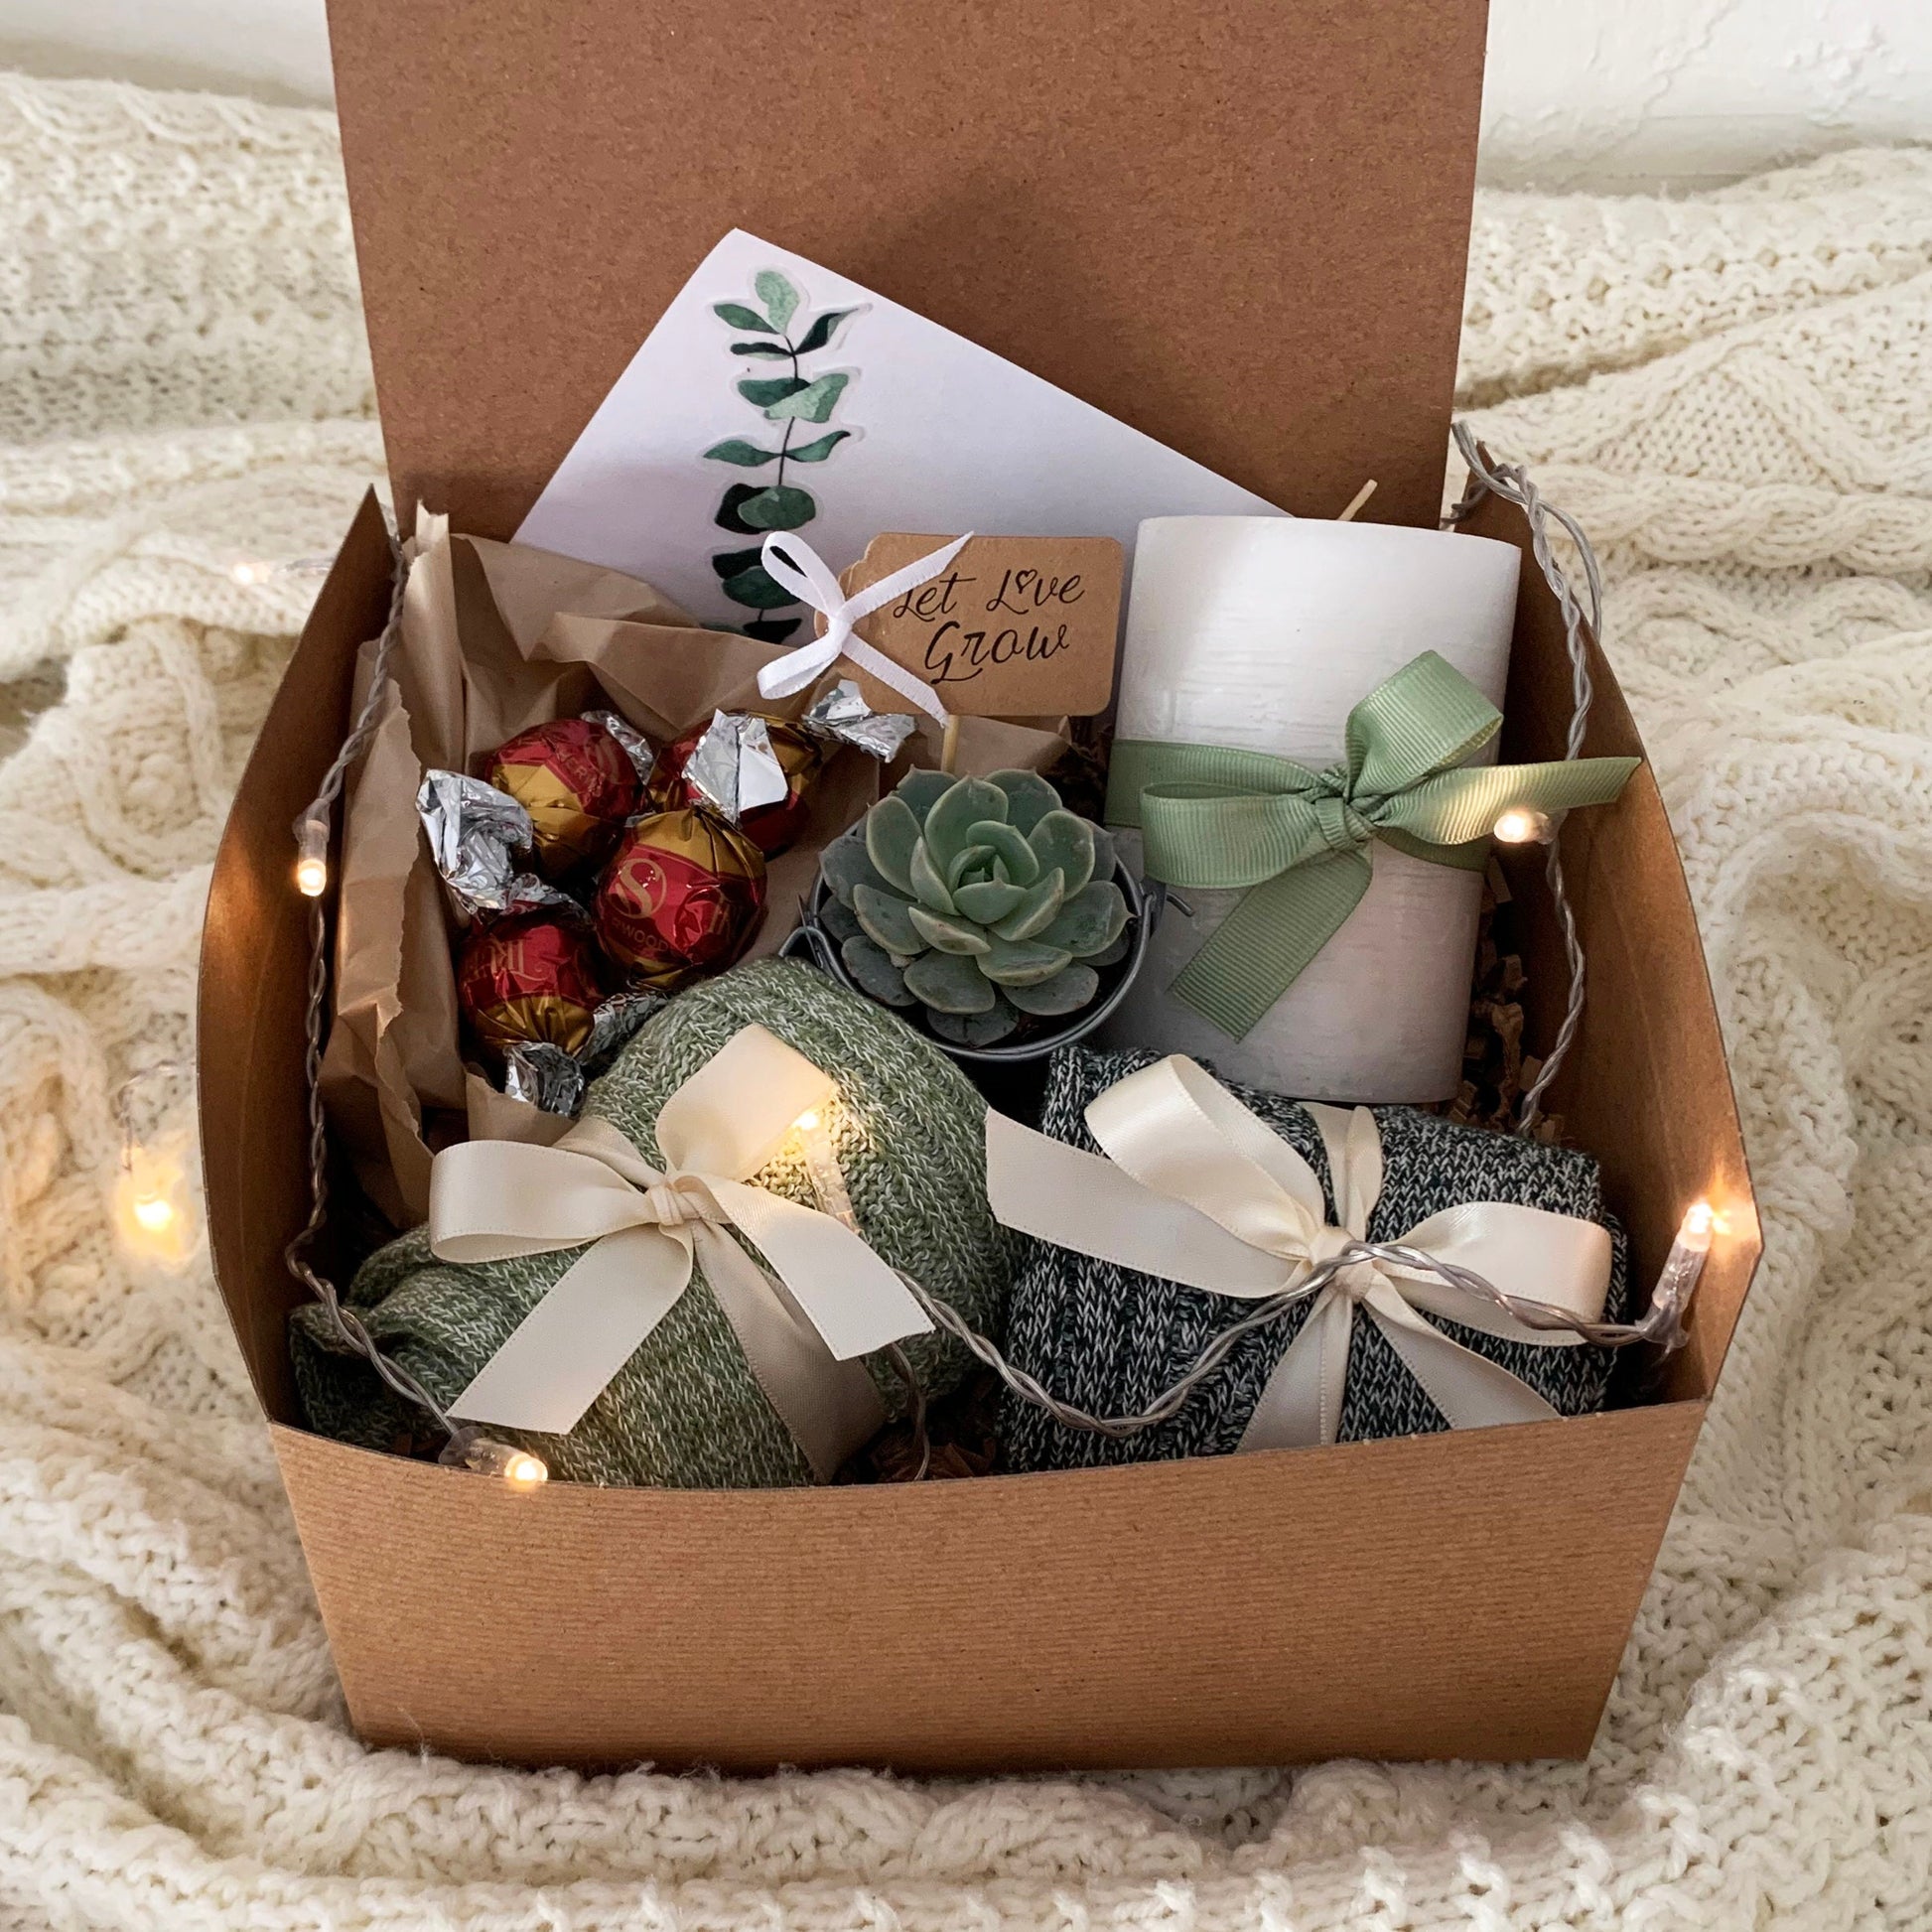 Let Love Grow Hygge Box For Two - happyhyggegifts.com